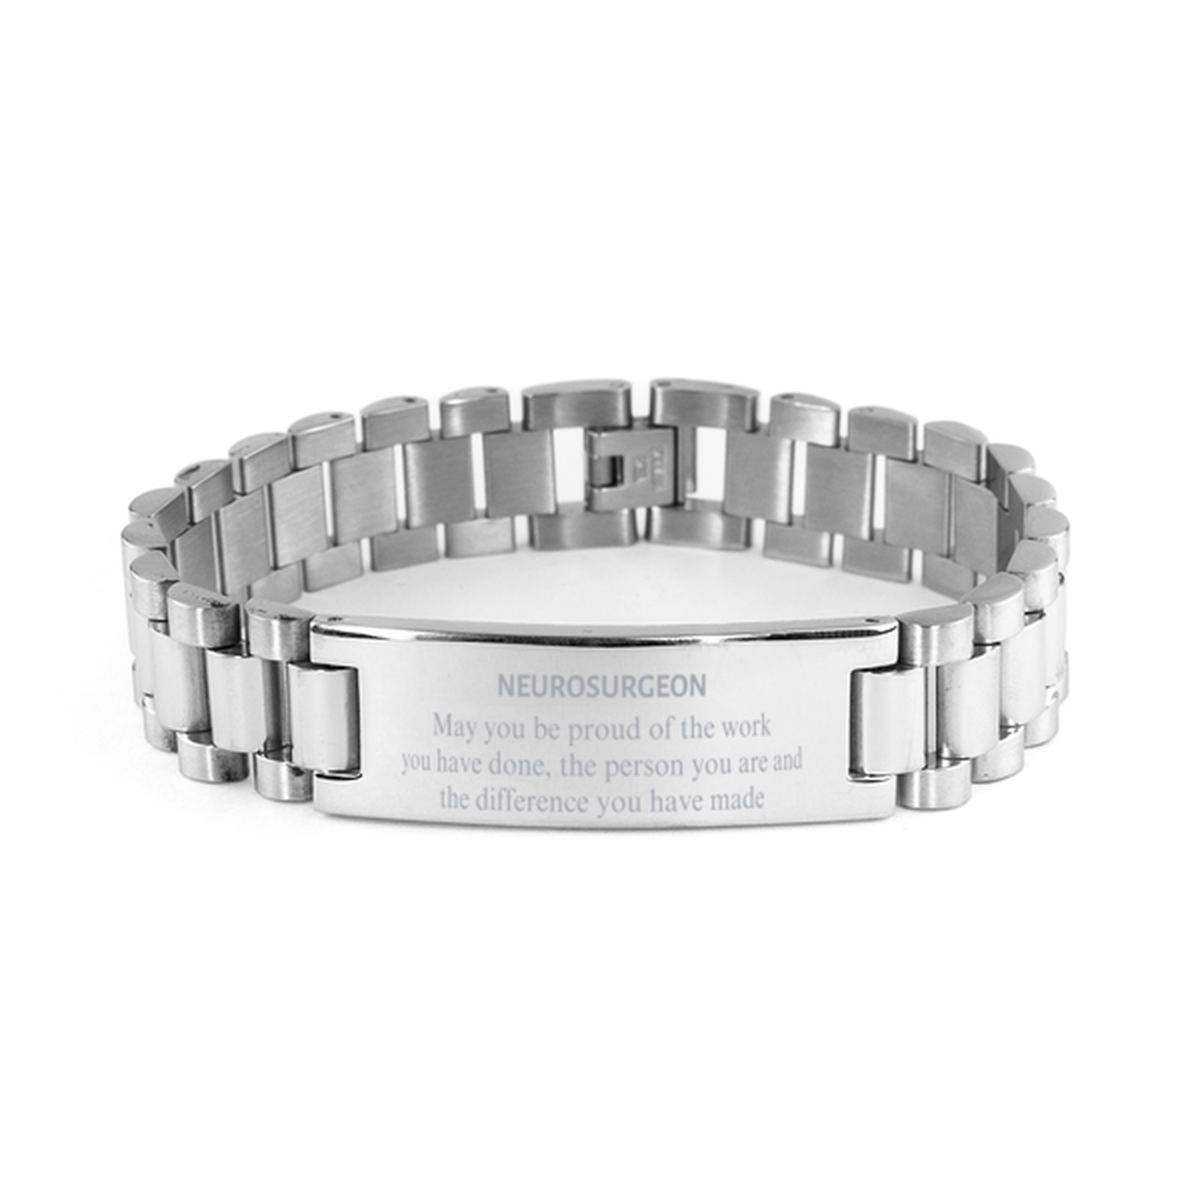 Neurosurgeon May you be proud of the work you have done, Retirement Neurosurgeon Ladder Stainless Steel Bracelet for Colleague Appreciation Gifts Amazing for Neurosurgeon